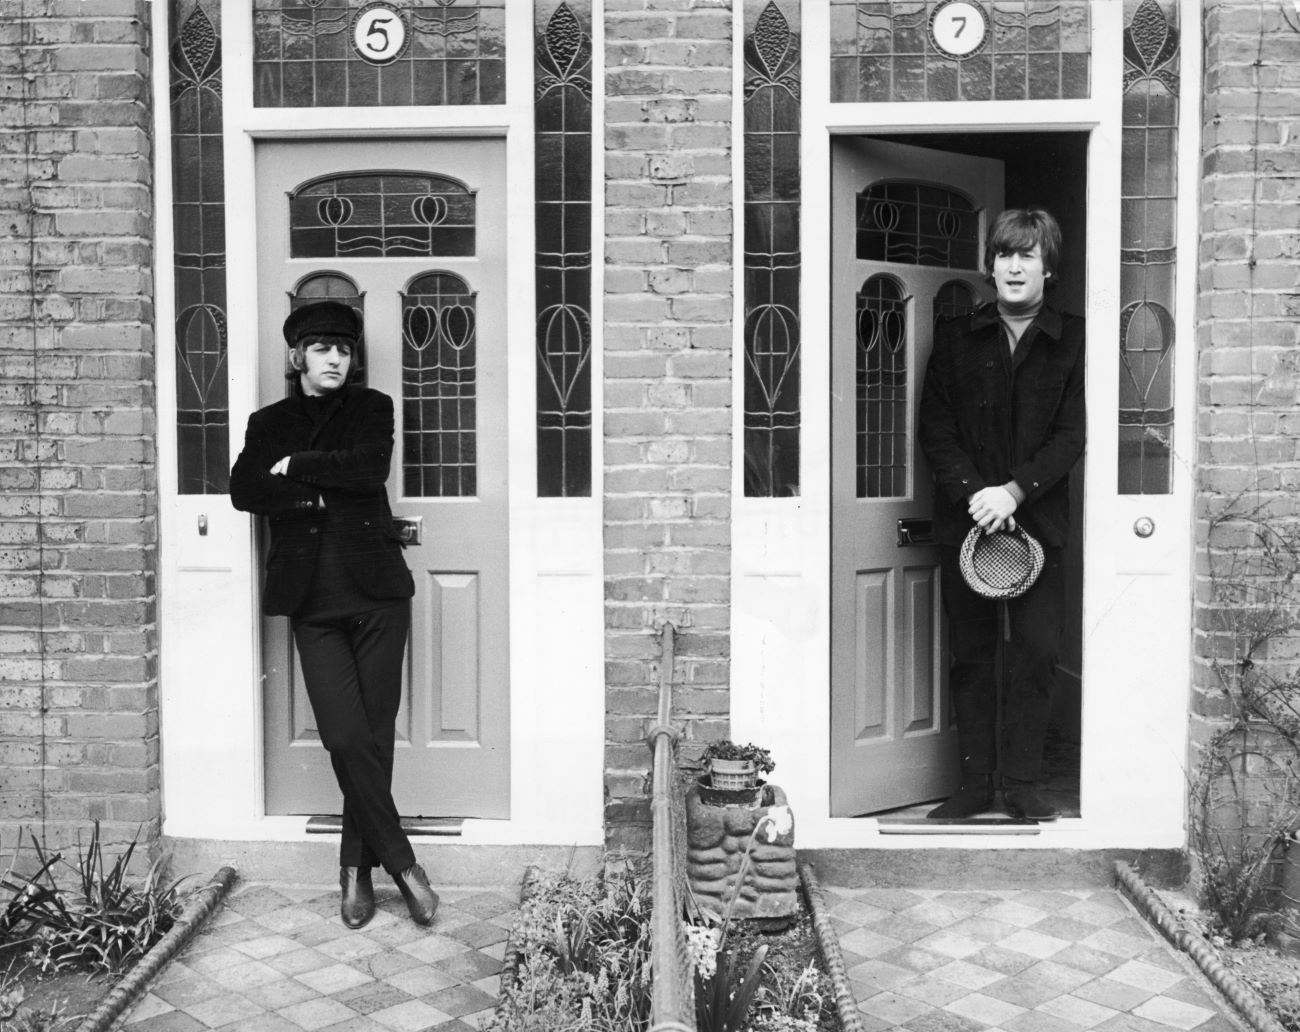 A black and white picture of Ringo Starr and John Lennon in the doorways of neighboring homes.